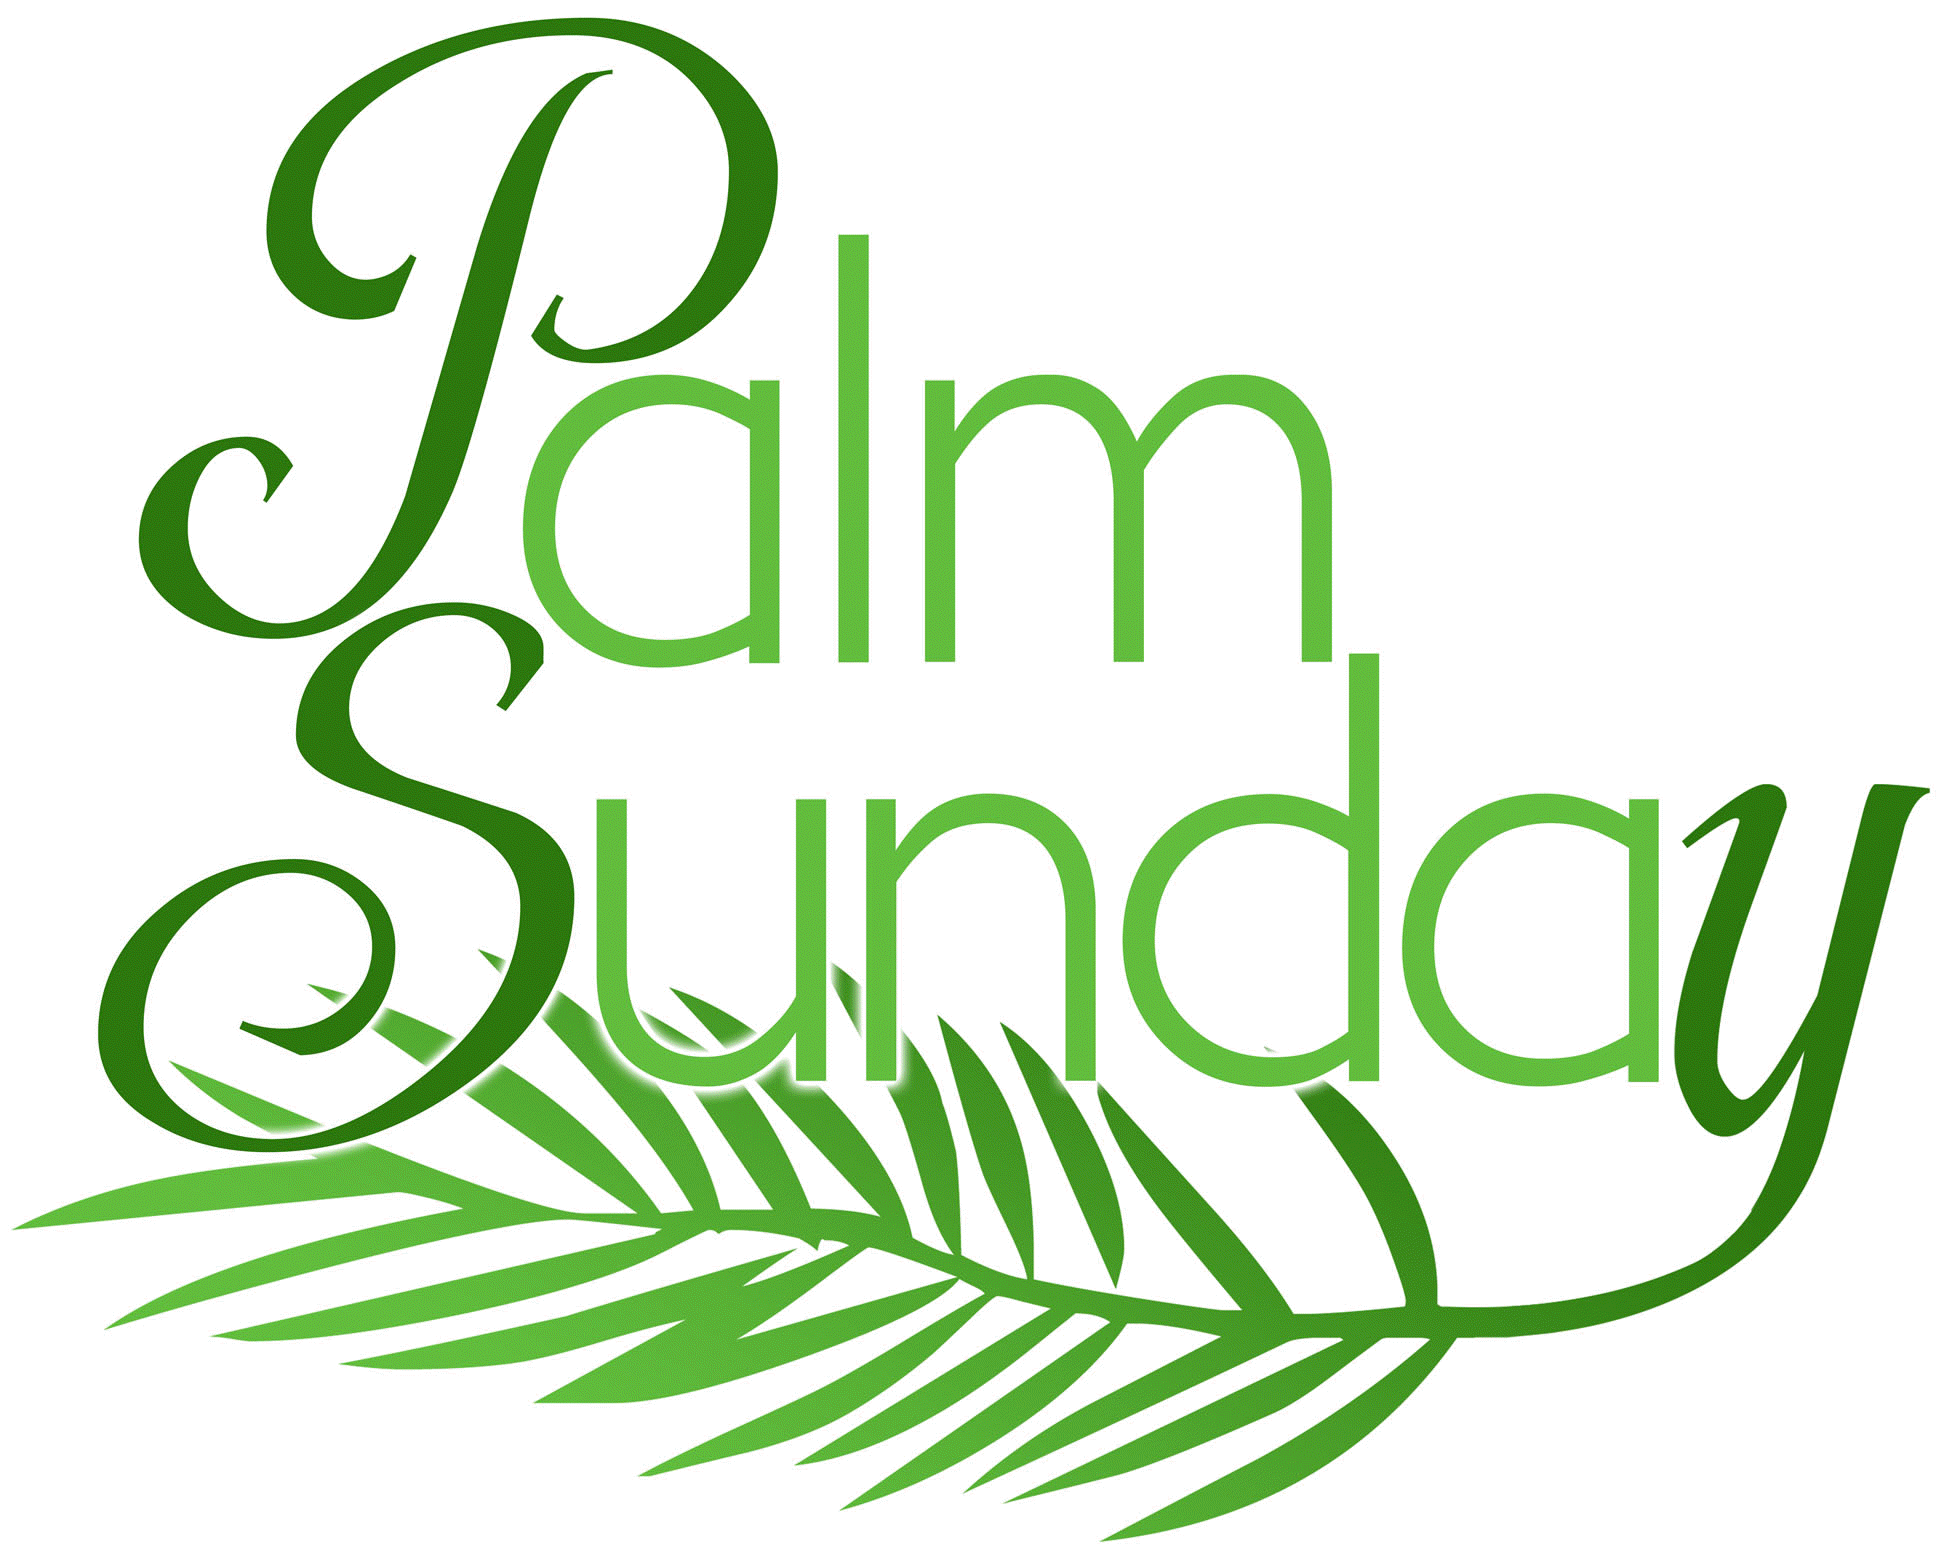 Easter Sunday Clipart   Cliparts Co